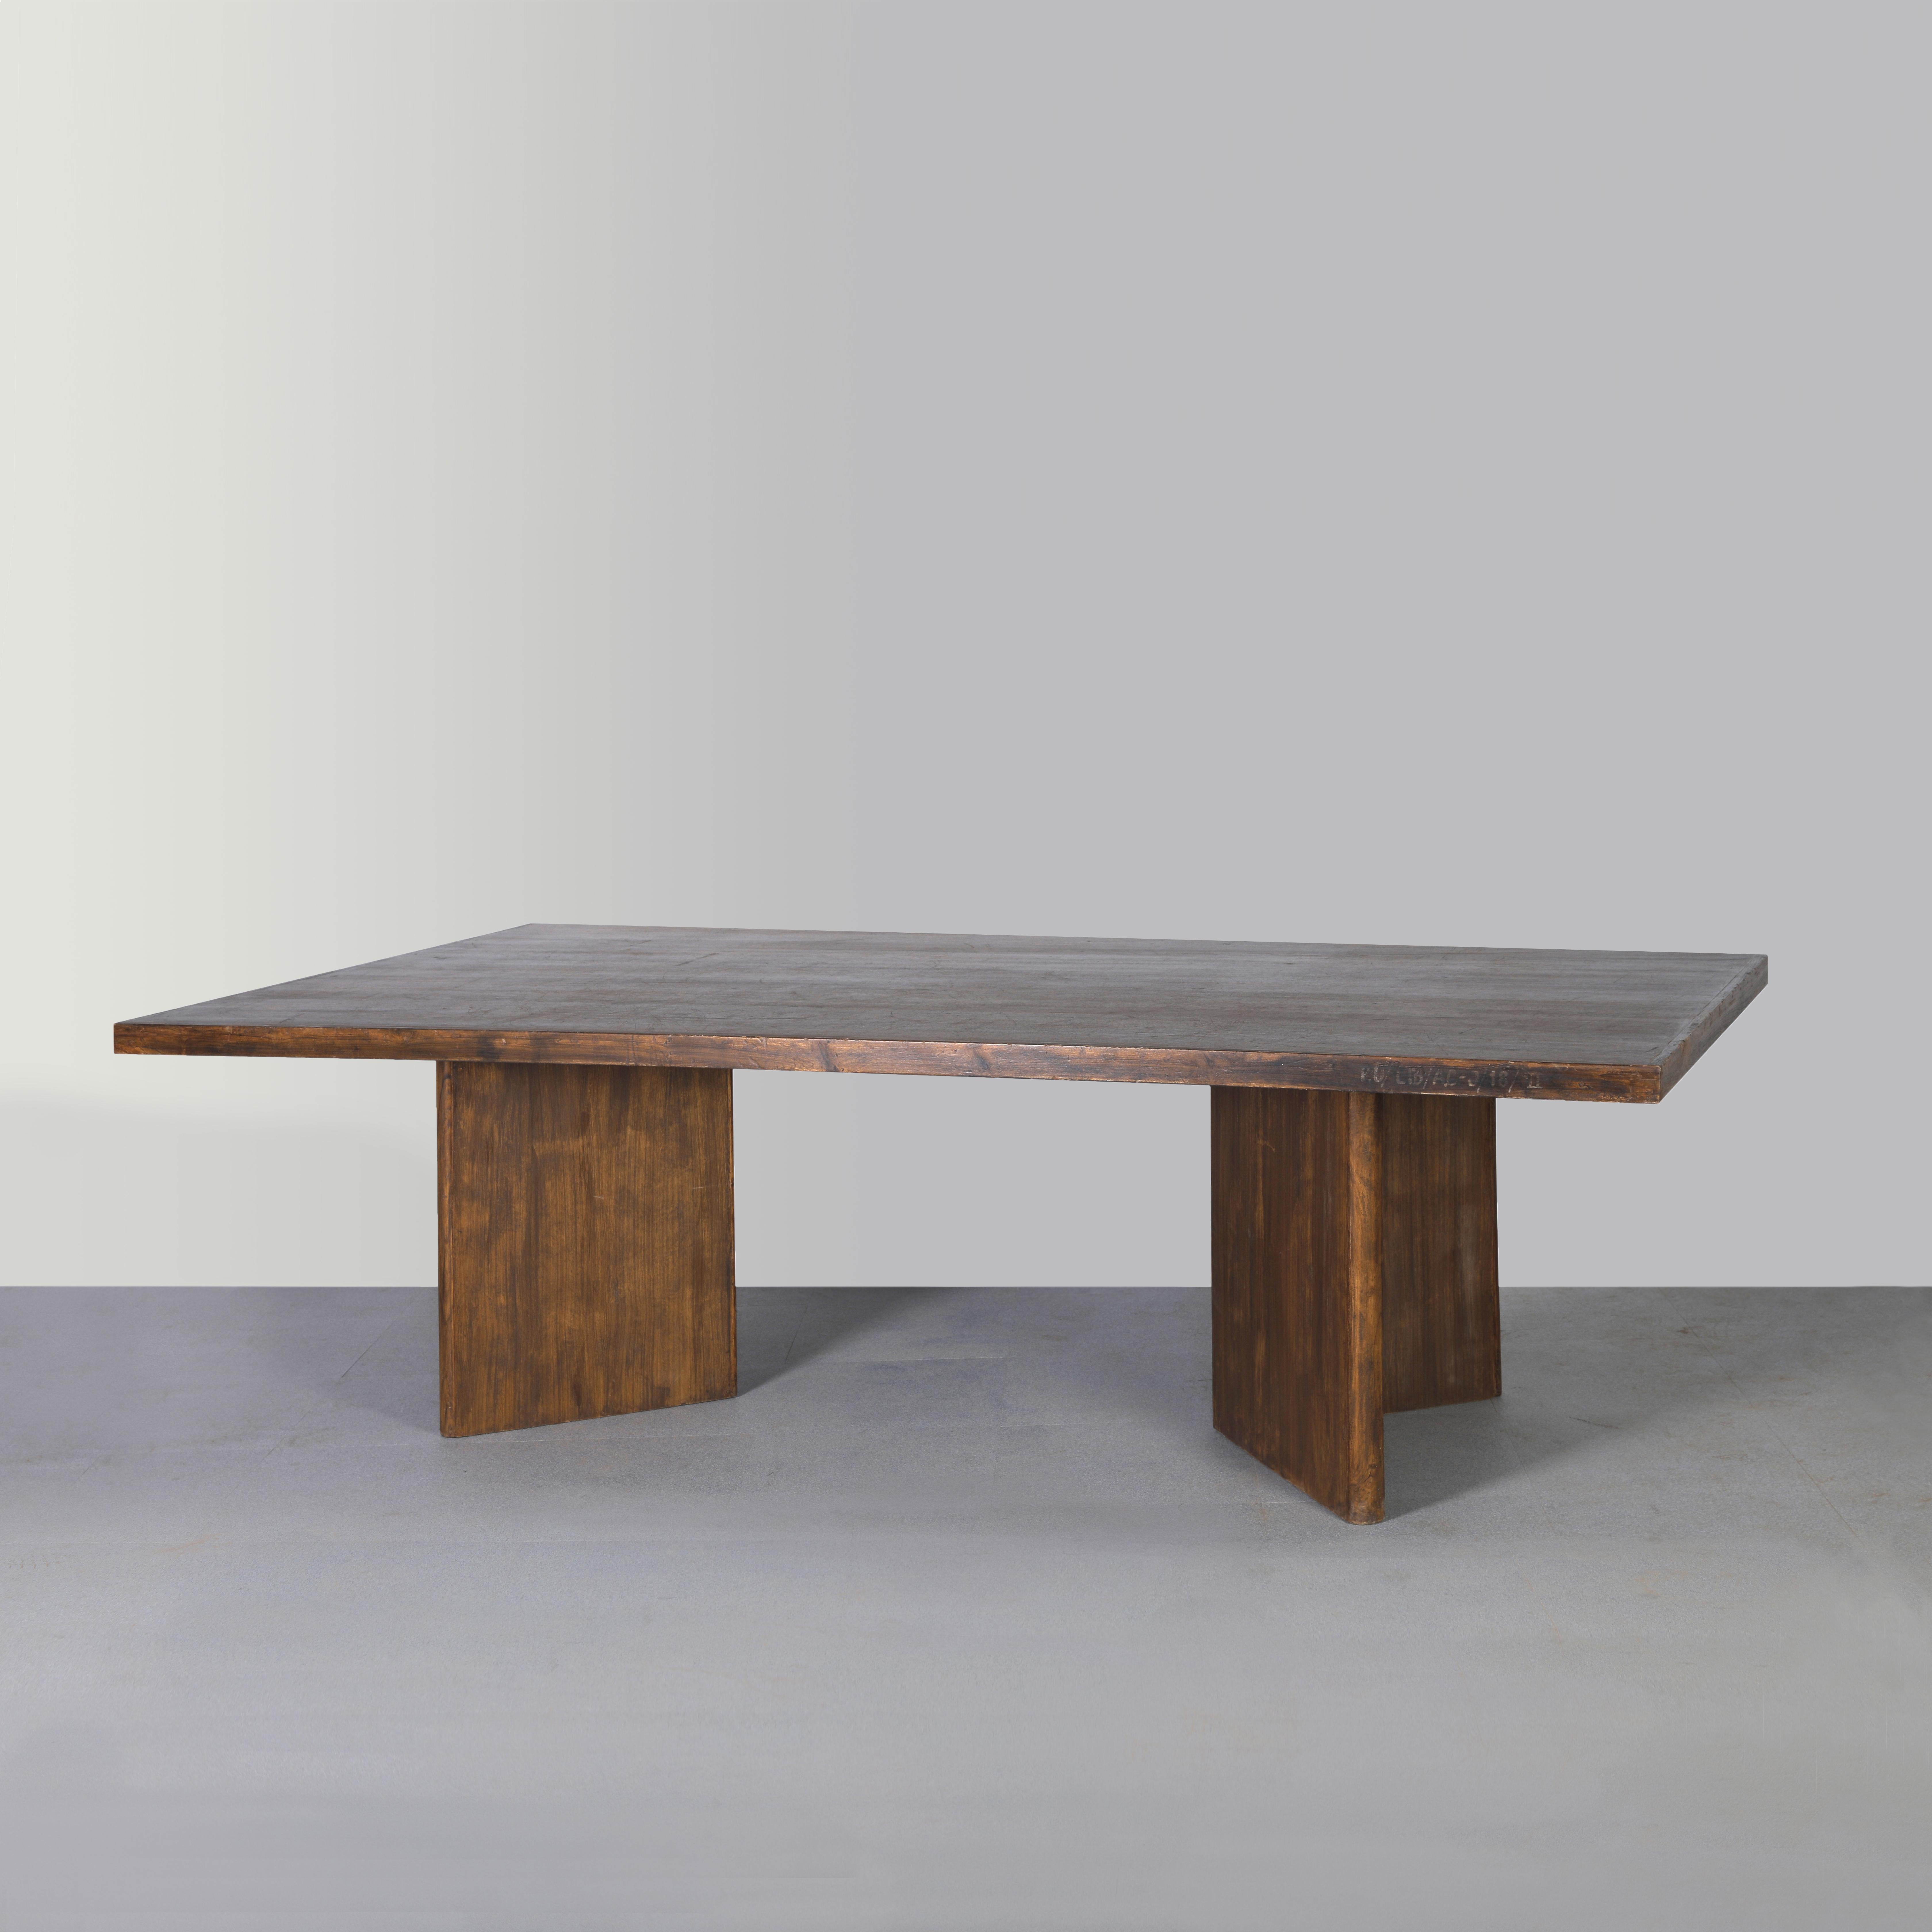 The rare conference table by Pierre Jeanneret has a removable tabletop and is mounted on two 